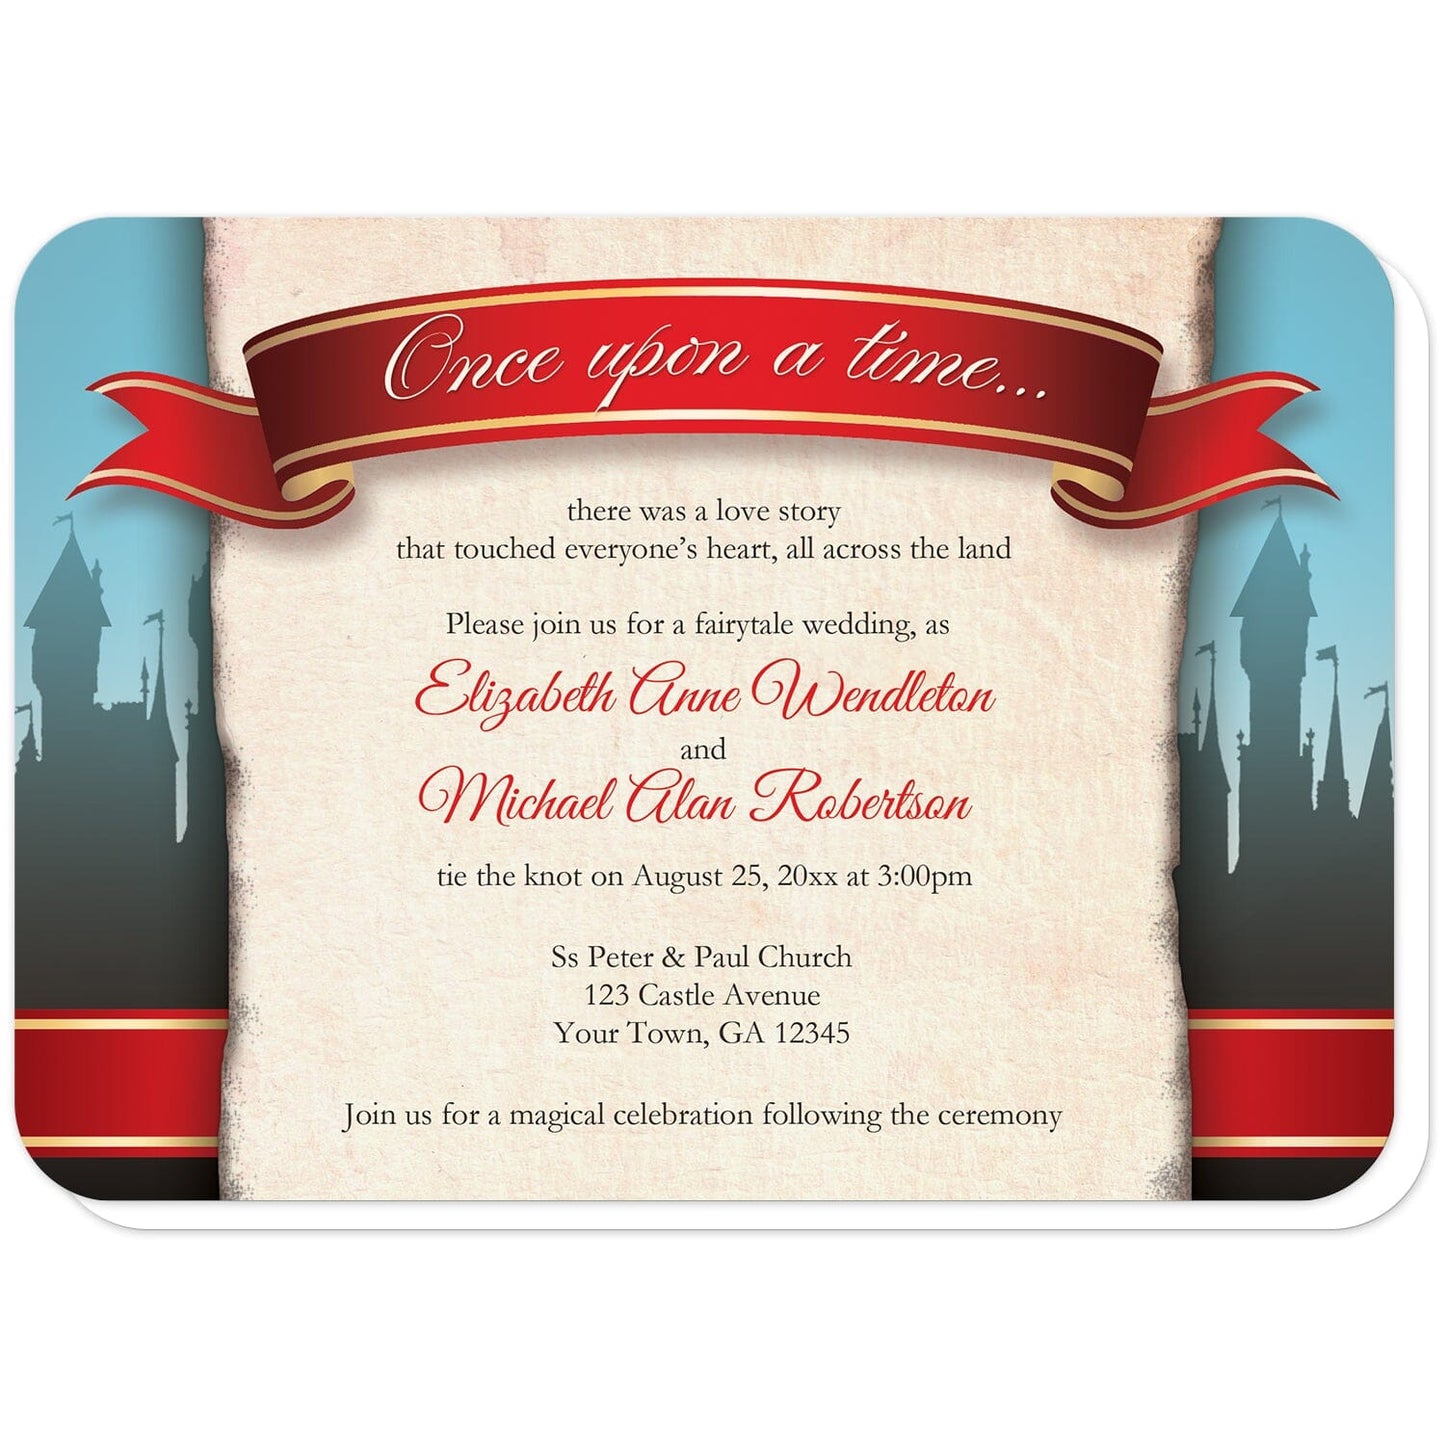 Fairytale Castle Red Once Upon a Time Wedding Invitations (with rounded corners) at Artistically Invited. Fairytale castle red once upon a time wedding invitations with a crimson red and gold banner that reads "Once upon a time...". There are historical tall castles in the distance over a blue to brown gradient on the sides. Your personalized wedding details are custom printed over a tattered old vintage paper illustration down the middle. 